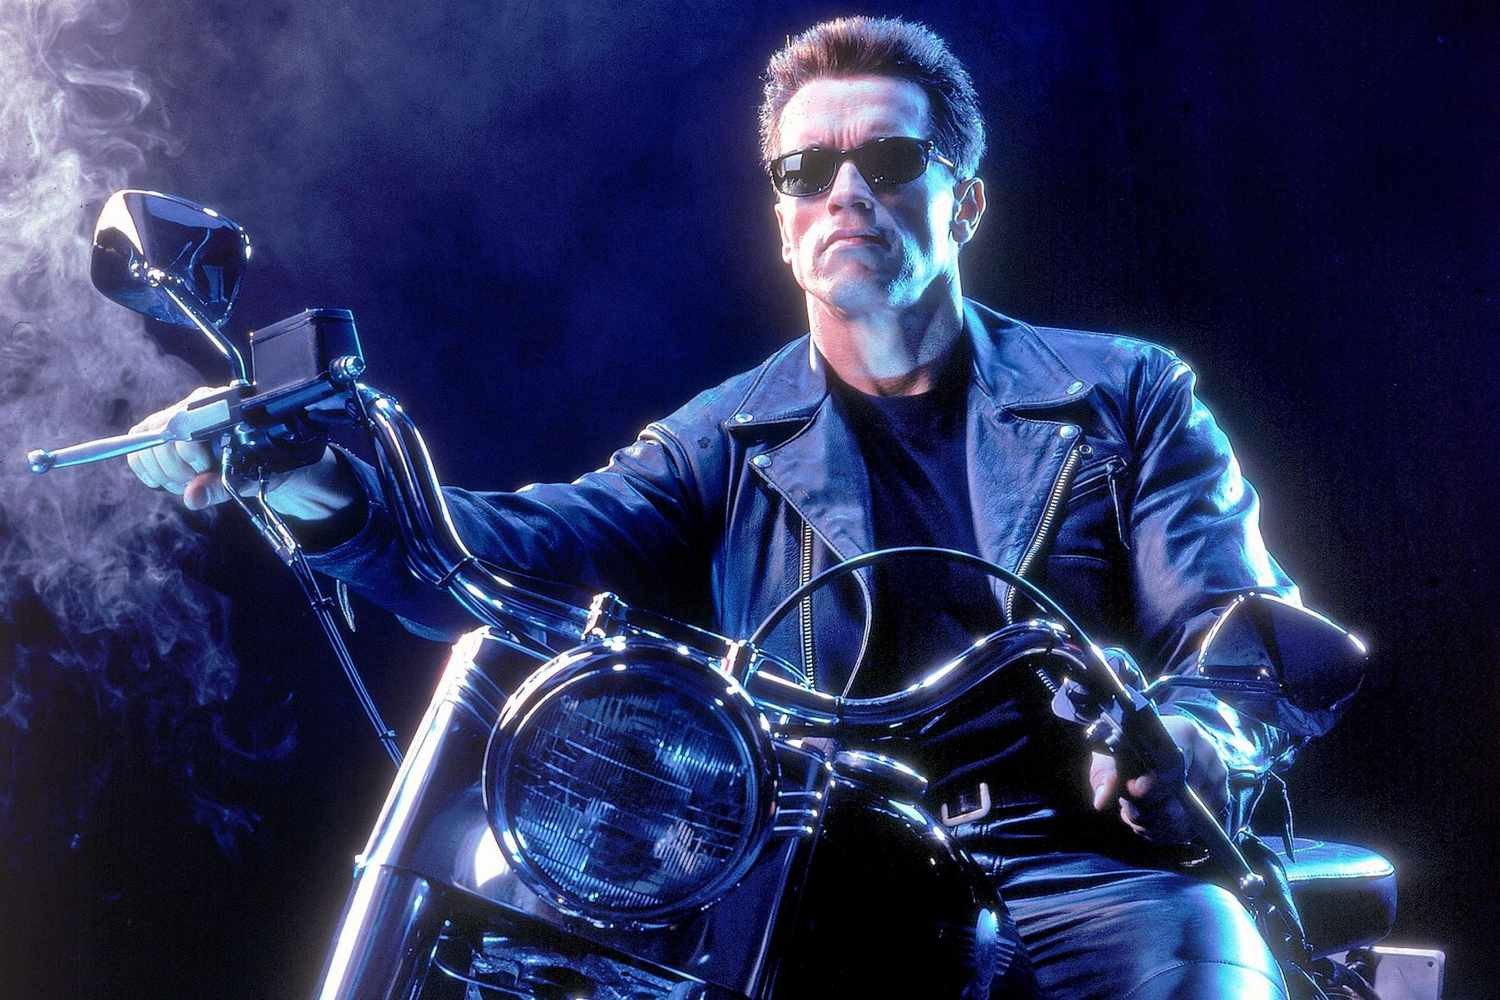 A still from The Terminator